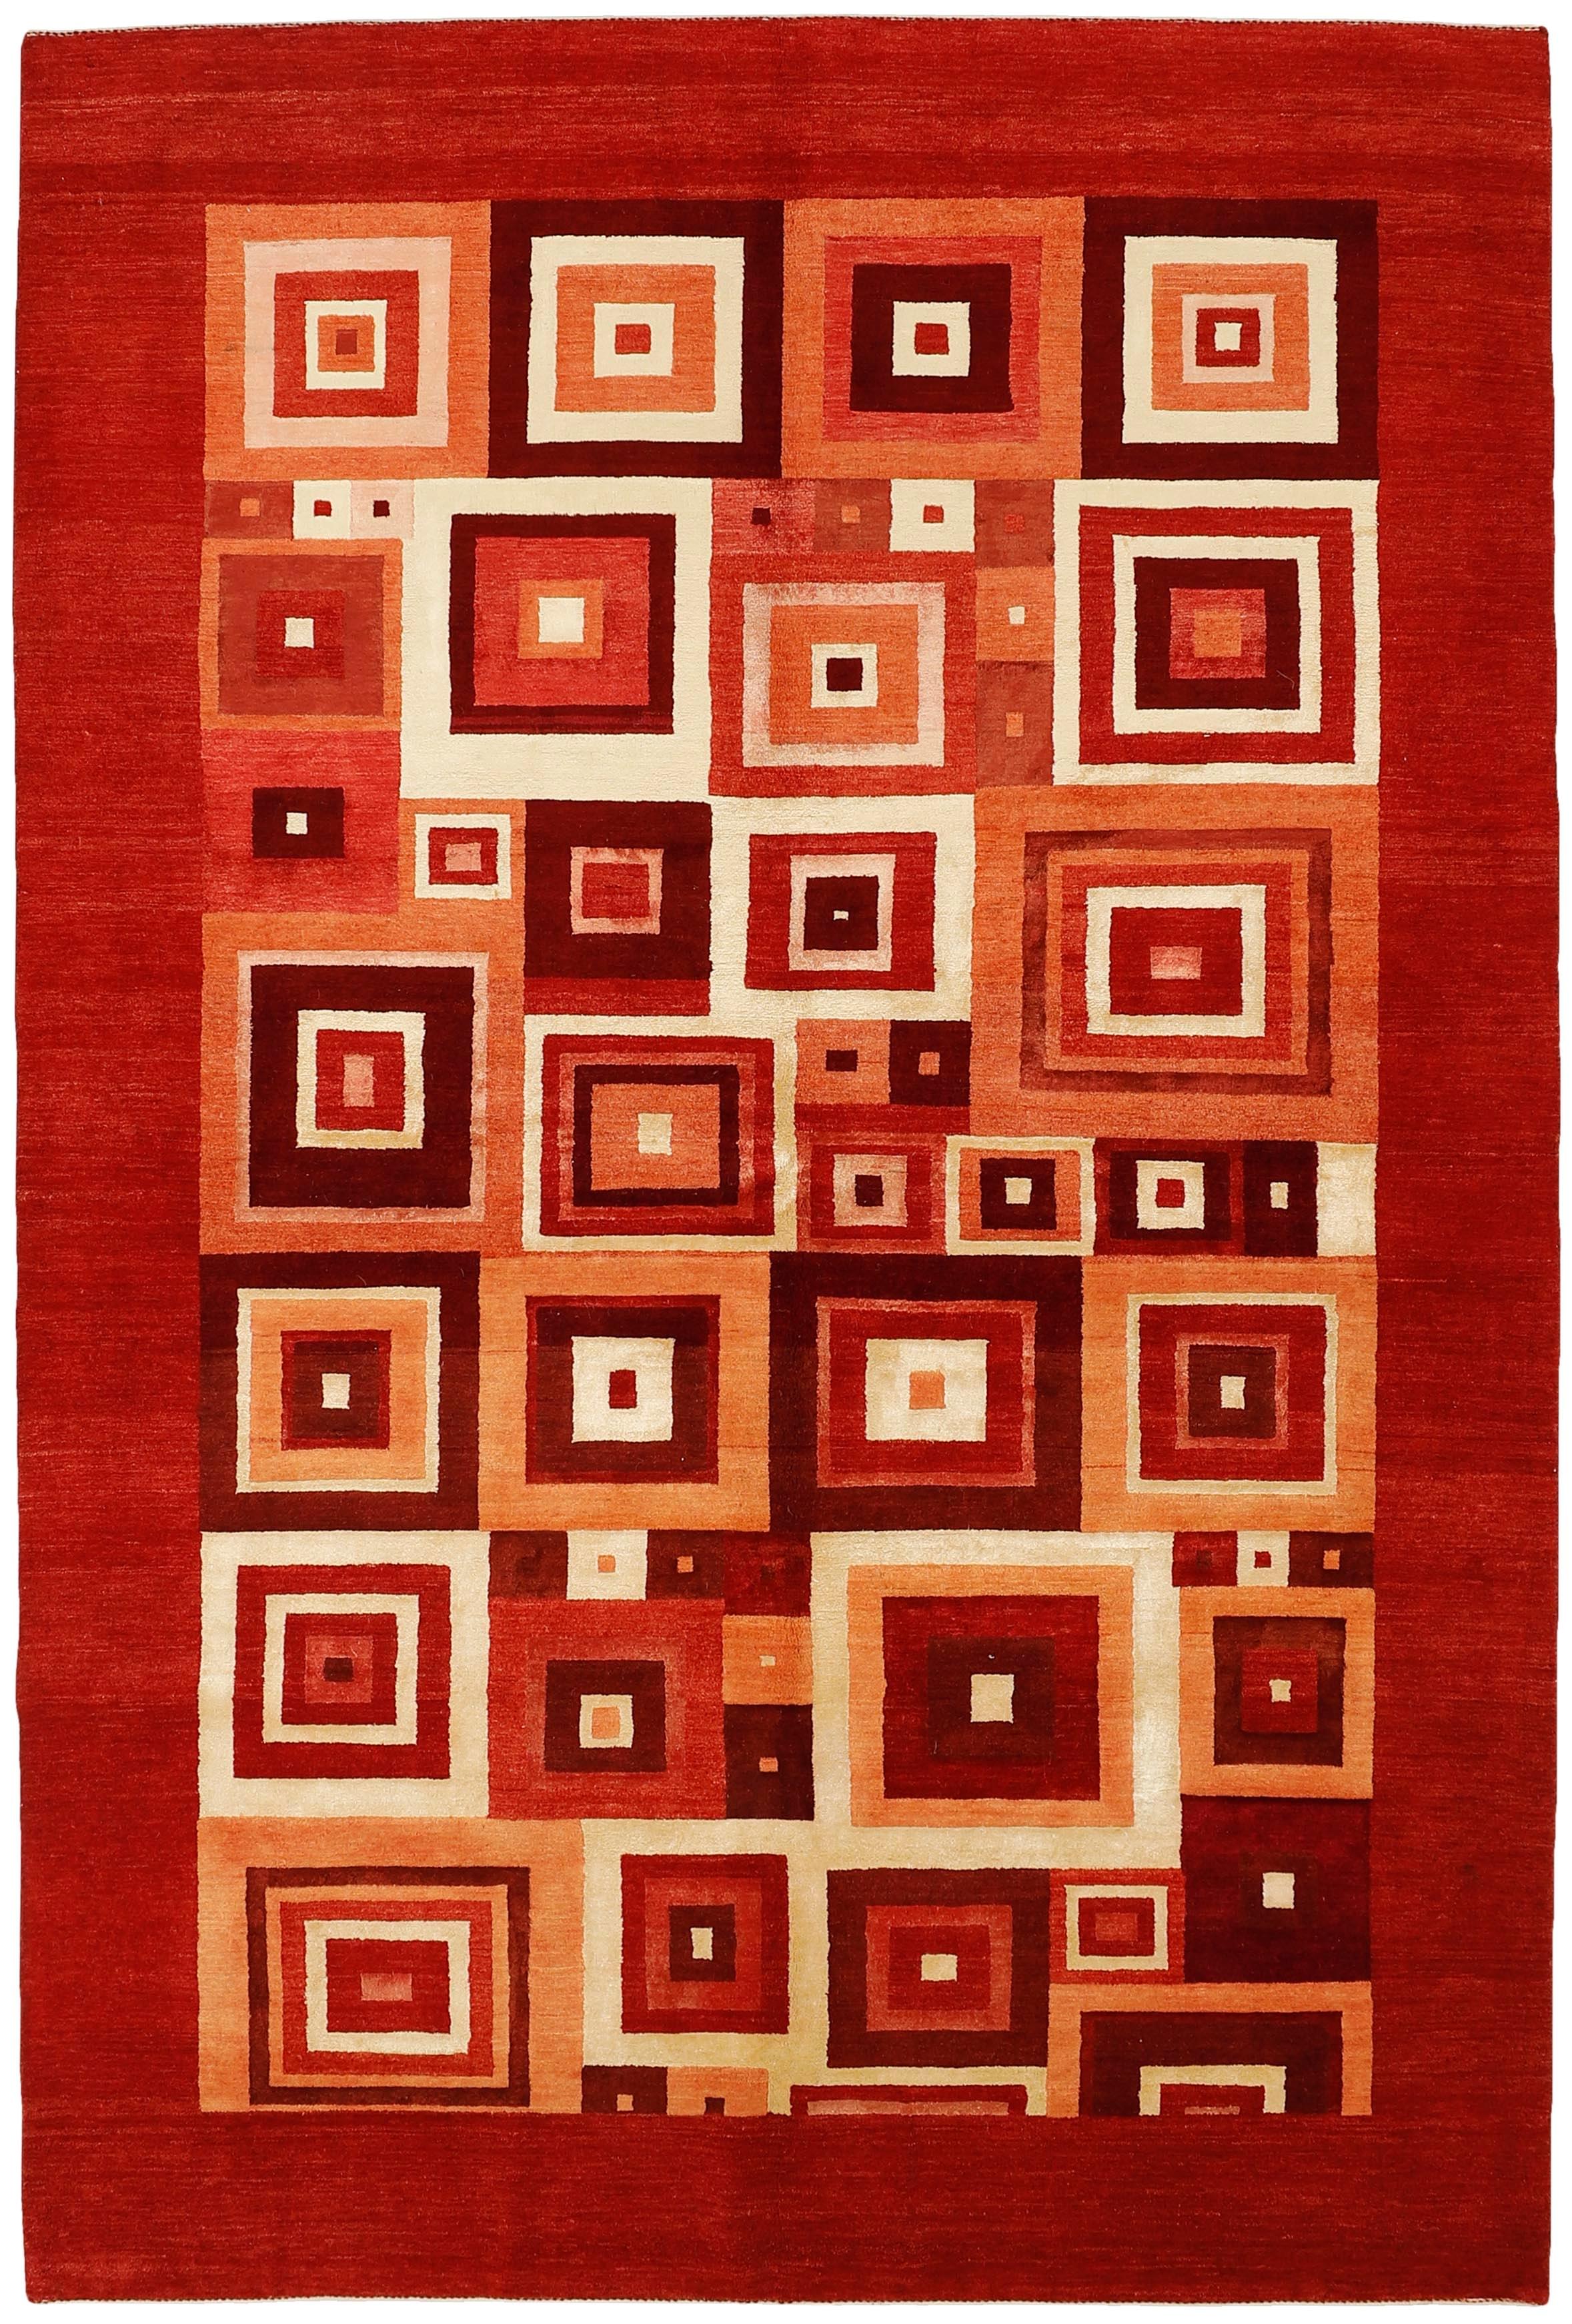 Red Persian rug with tribal geometric design